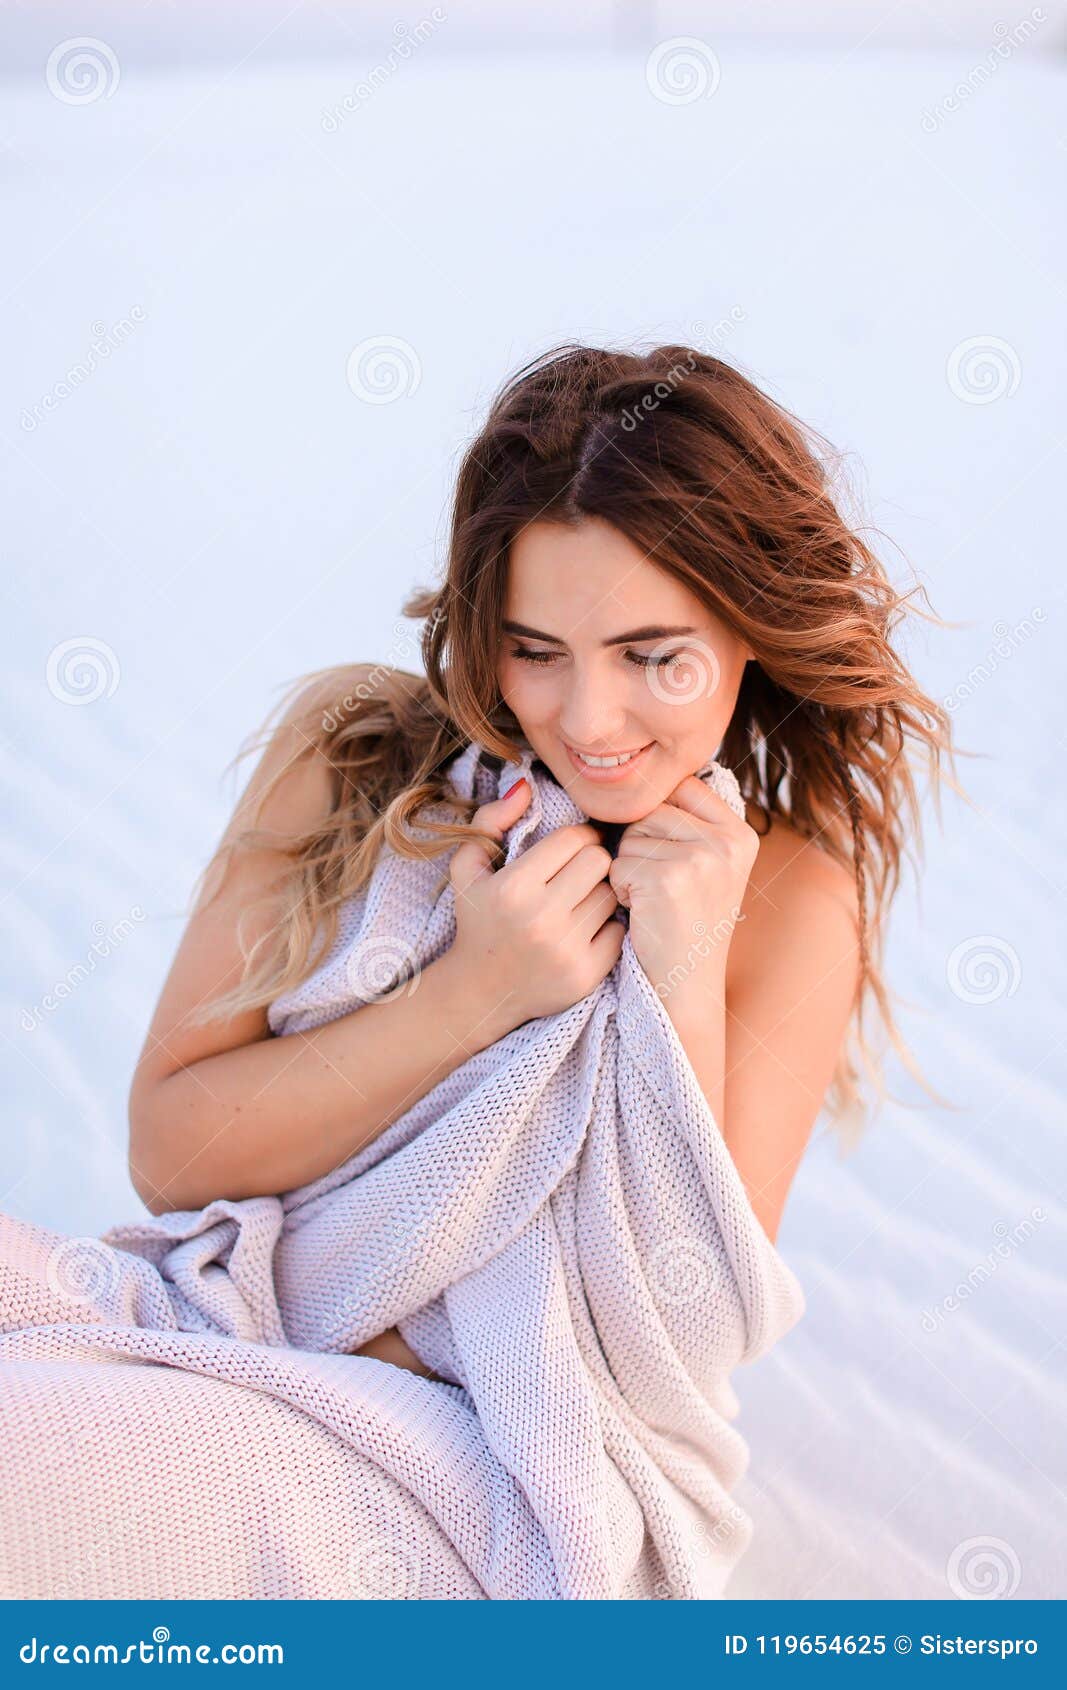 Caucasian female person wrapped in blanket sitting on white sand on beach. Concept of photo session in desert and relax on nature.